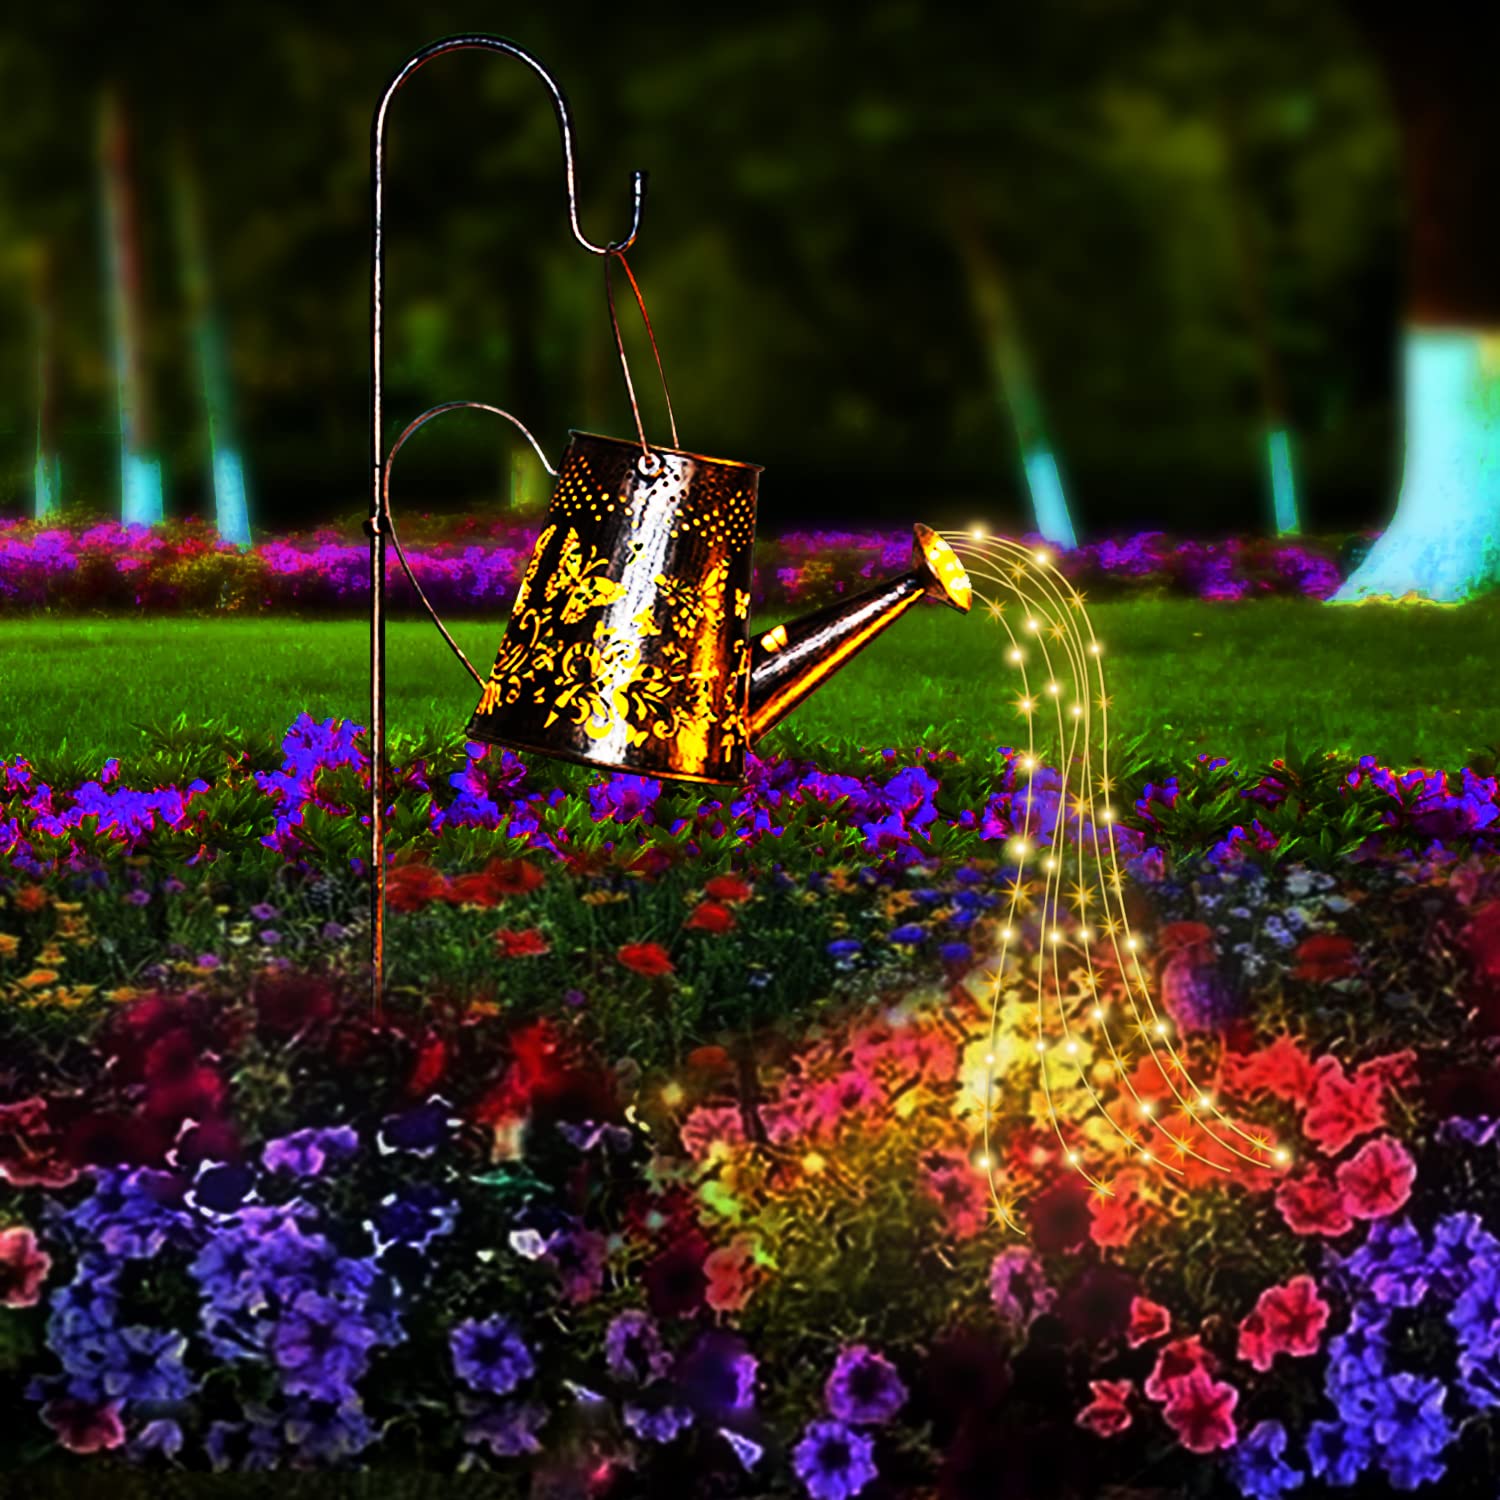 Solar Watering Can Lights Garden Decorations , Large Waterproof Warm White Butterfly Hollow Lamp with 91 LED for Outdoor Lawn Patio Yard Pathway Walkway (with Bracket) (Steady on Pattern)